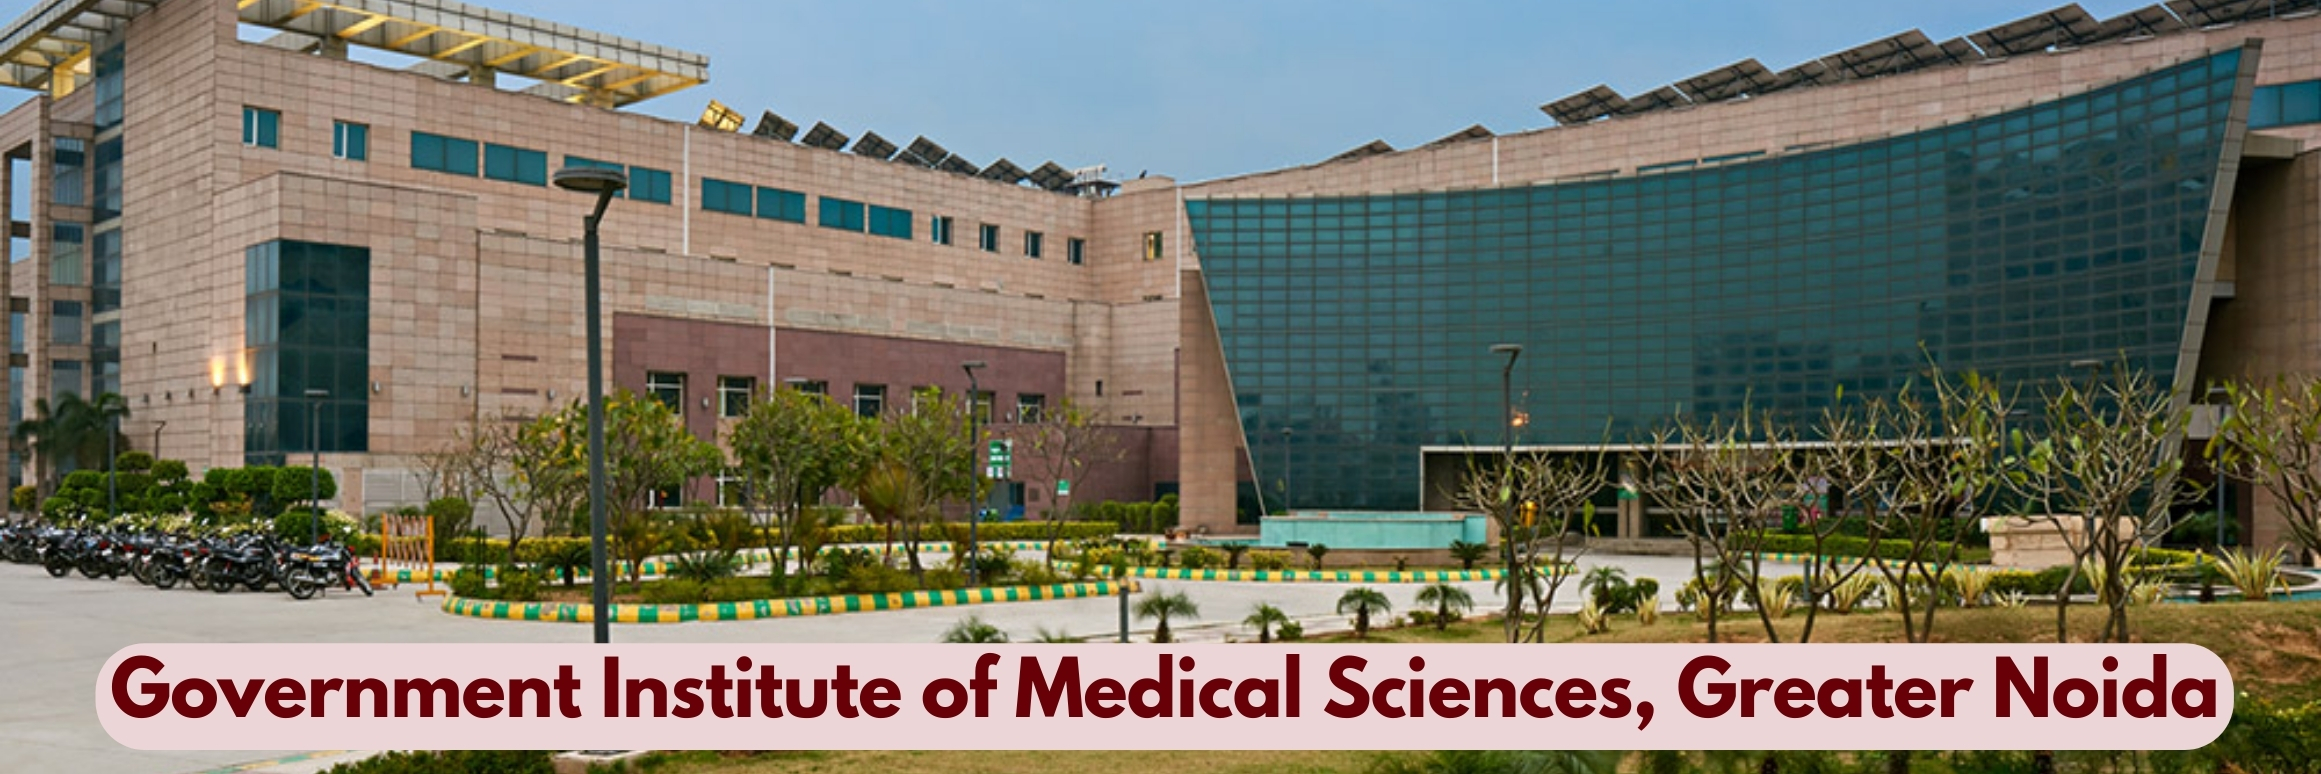 Government Institute of Medical Sciences​, Greater Noida